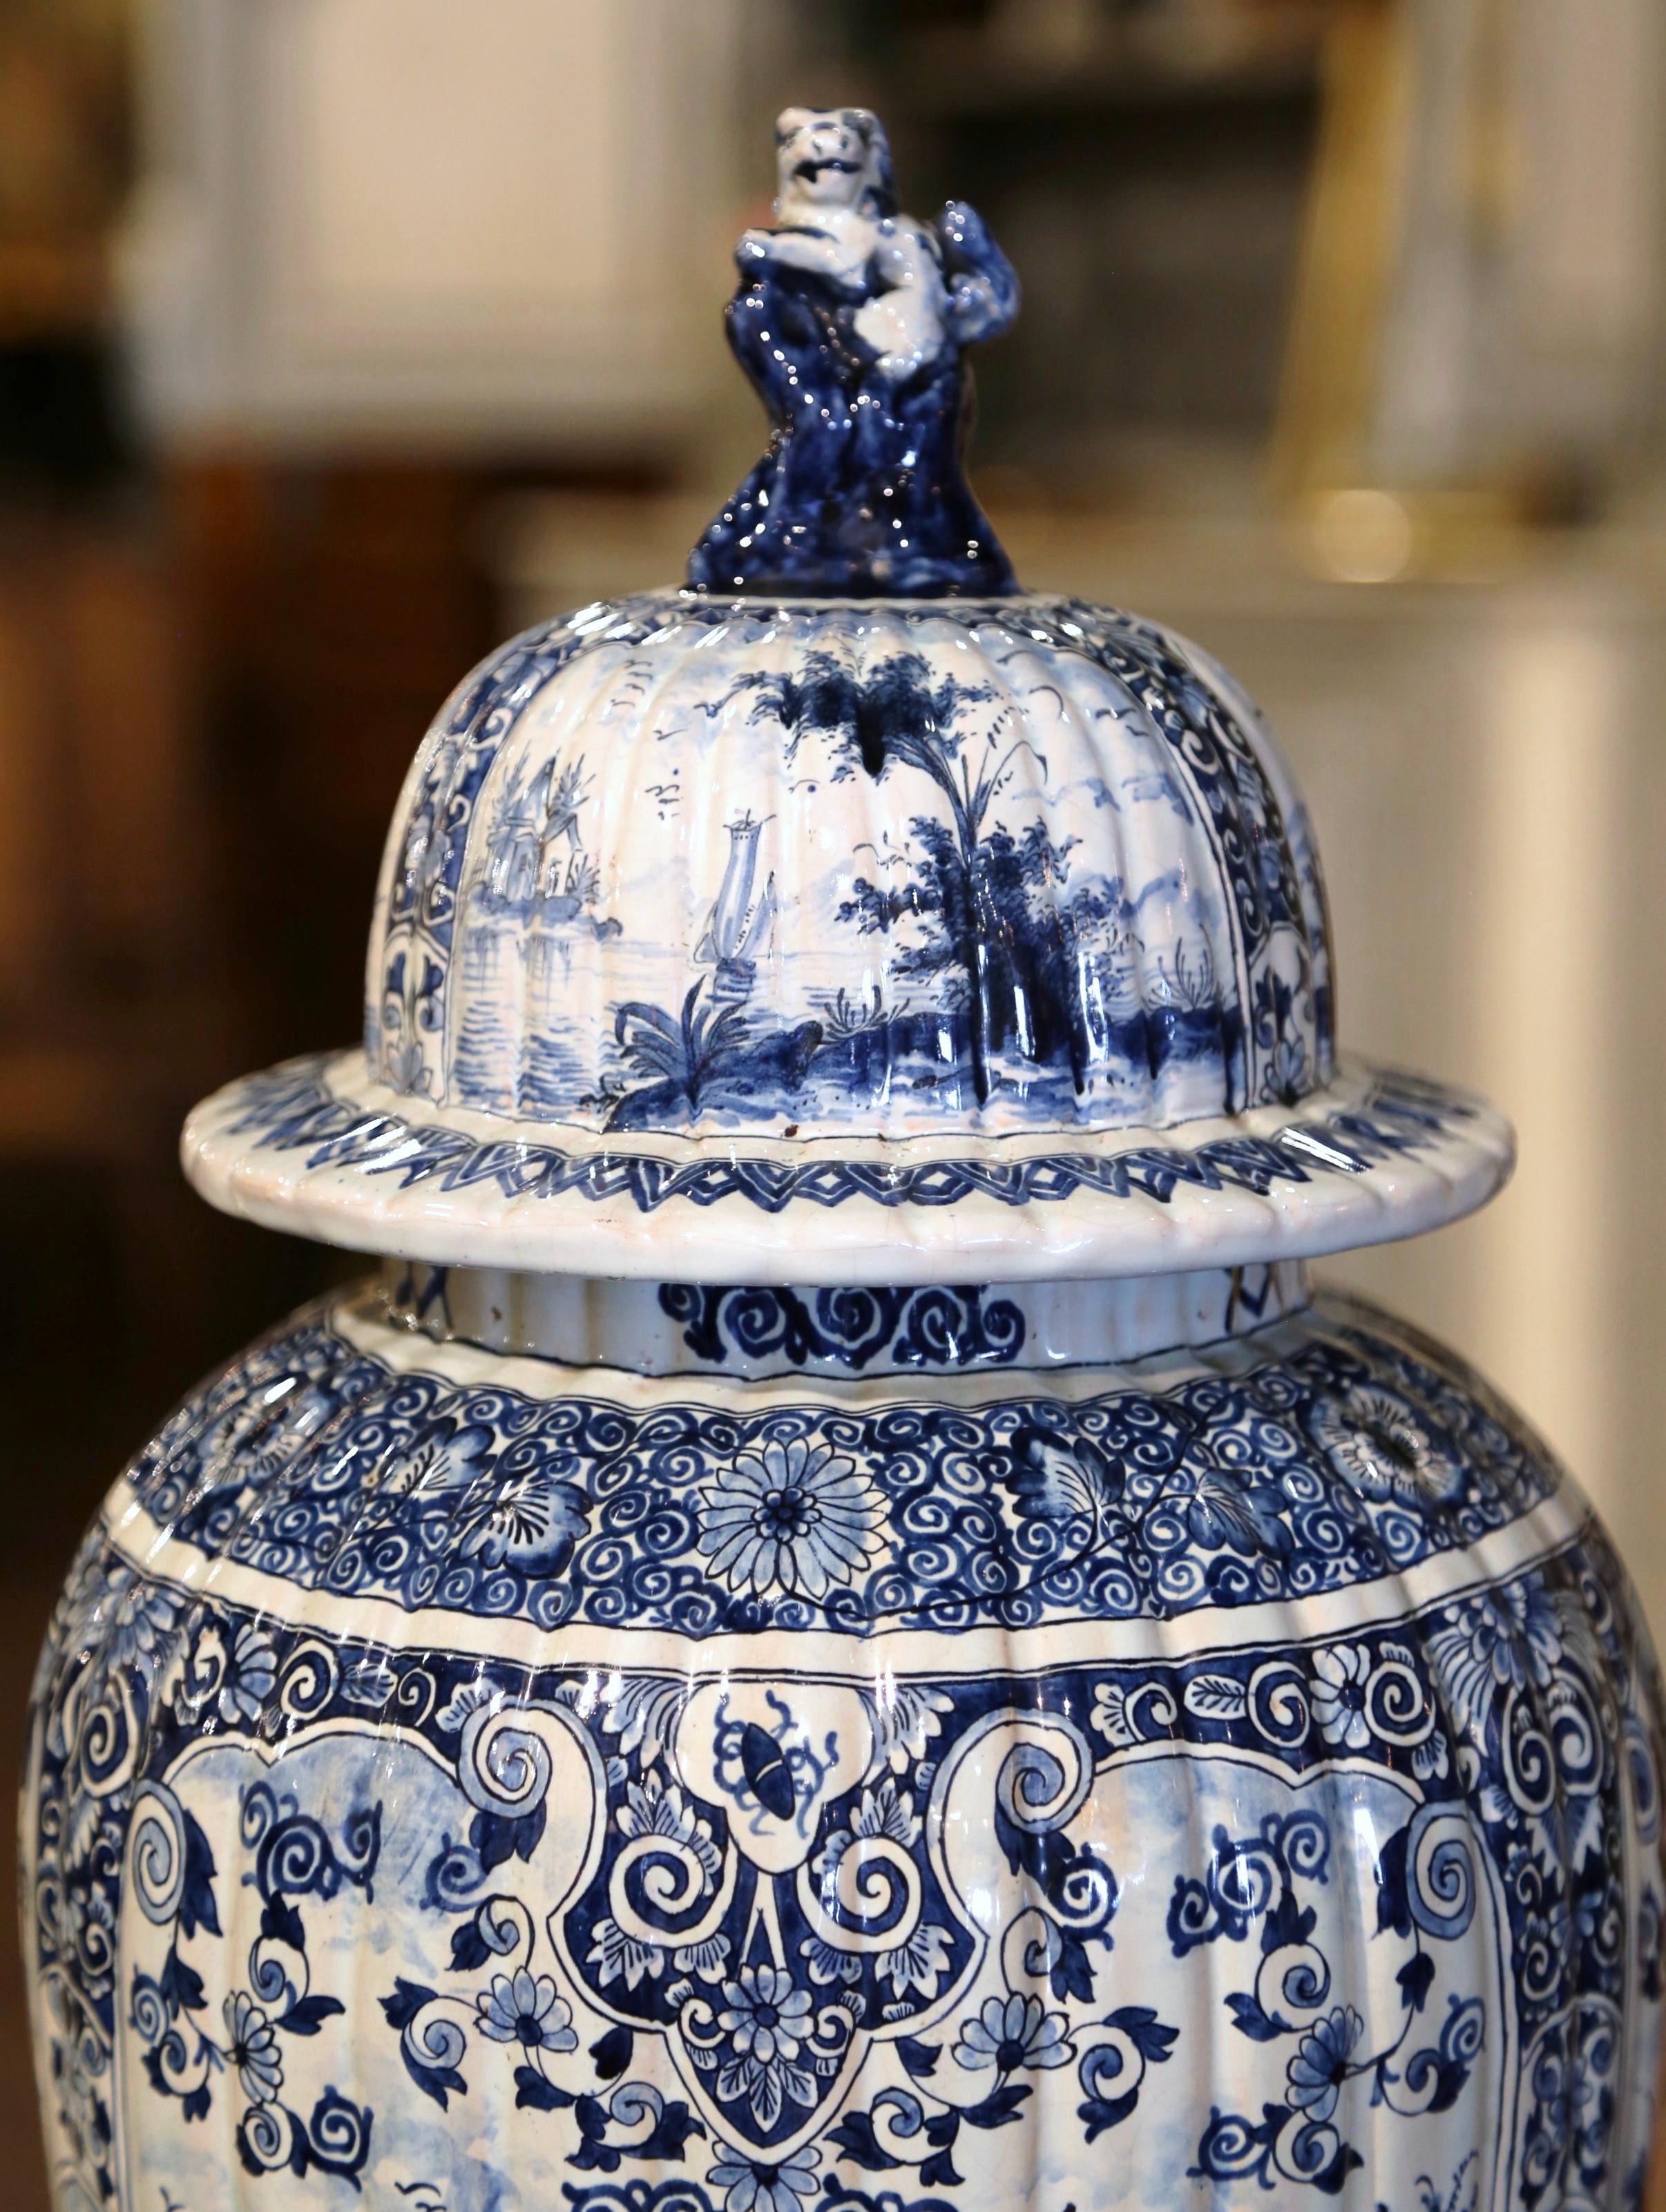 This important antique vase was crafted in France, circa 1780. Round in shape with gadrooned body style, the elegant potiche features hand painted decor of figural medallions divided with high relief leaf and shell motifs; each painted medallion